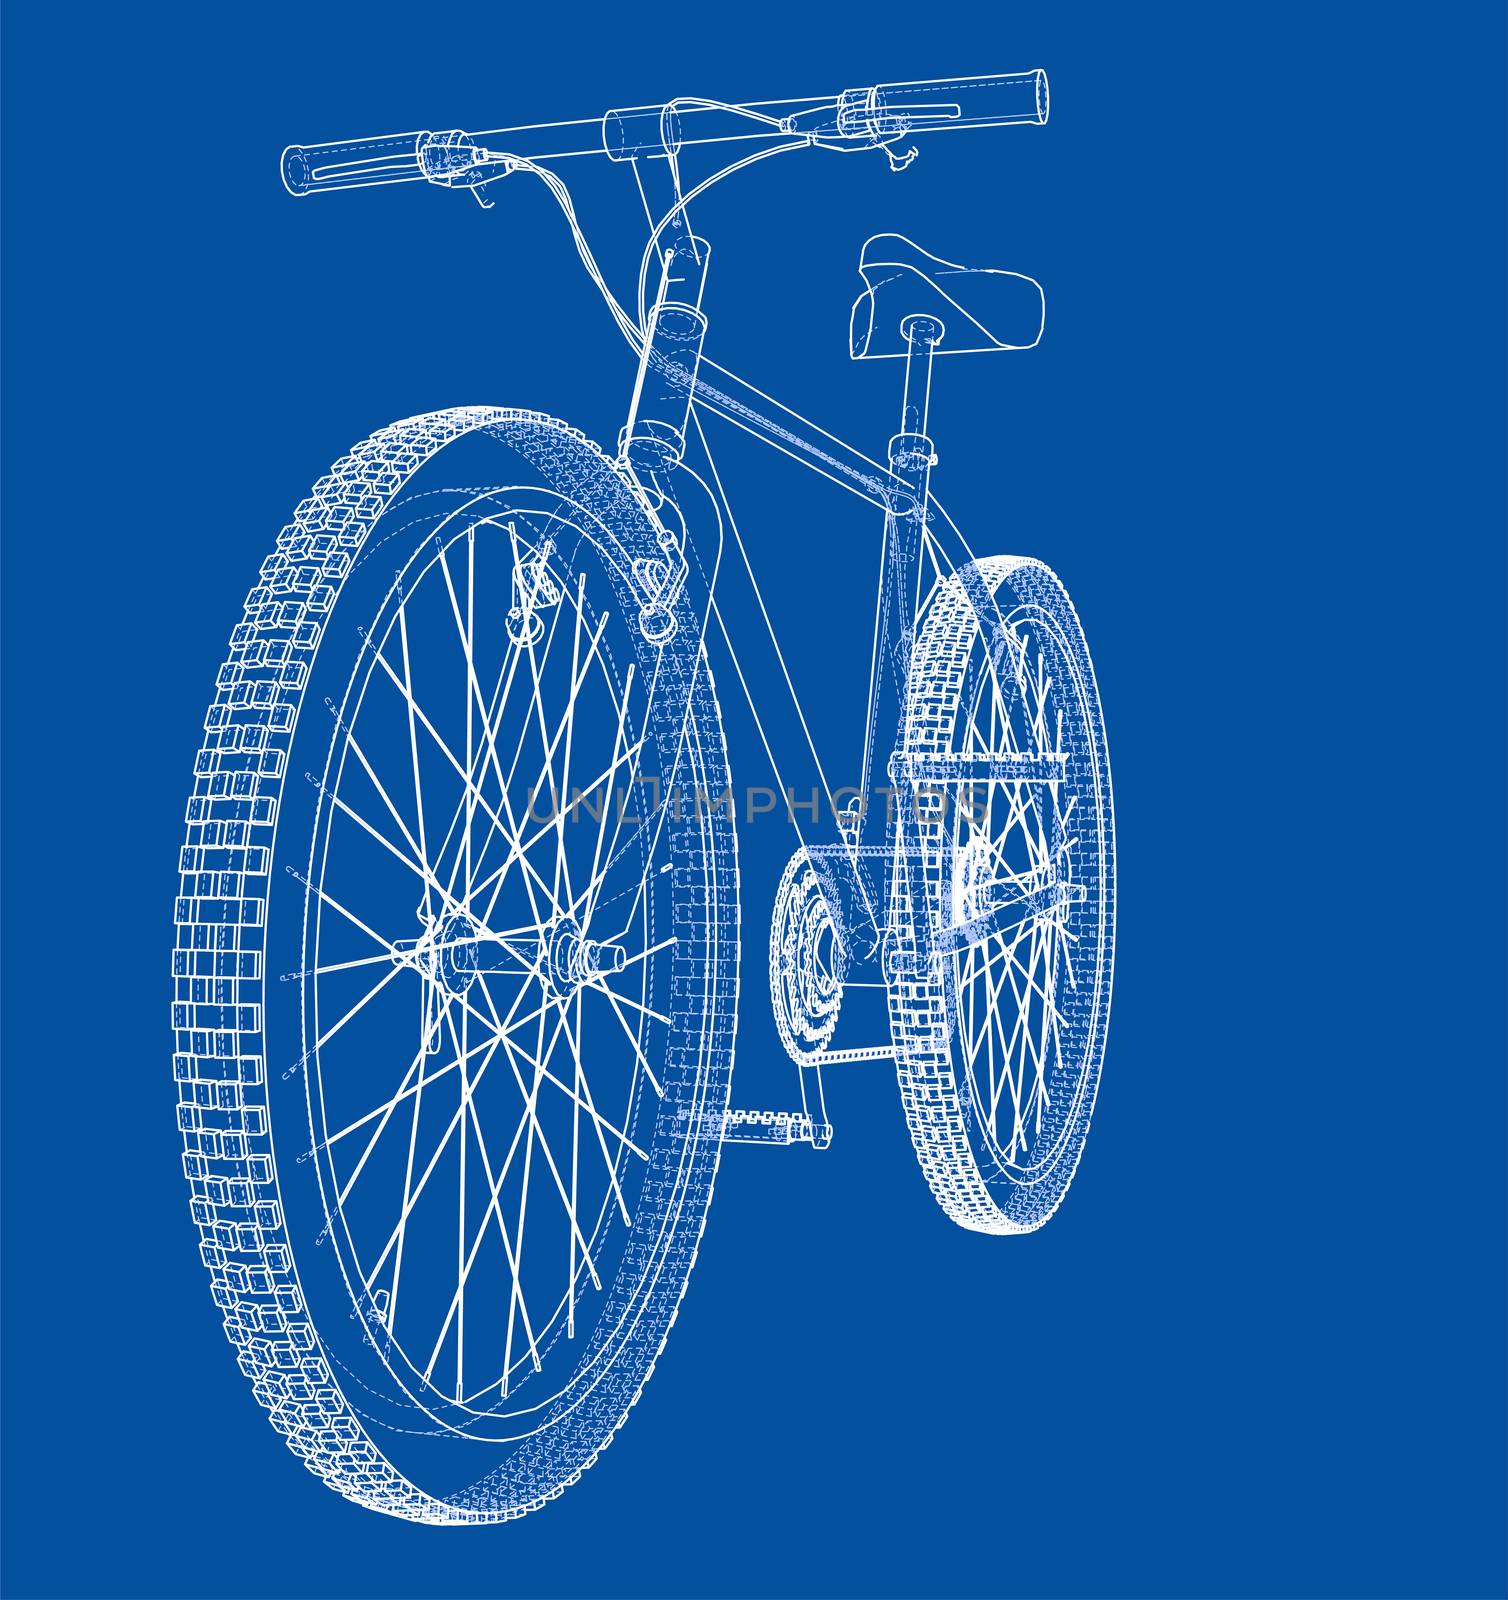 Bicycle blueprint 3d illustration. Wire-frame style on blue background